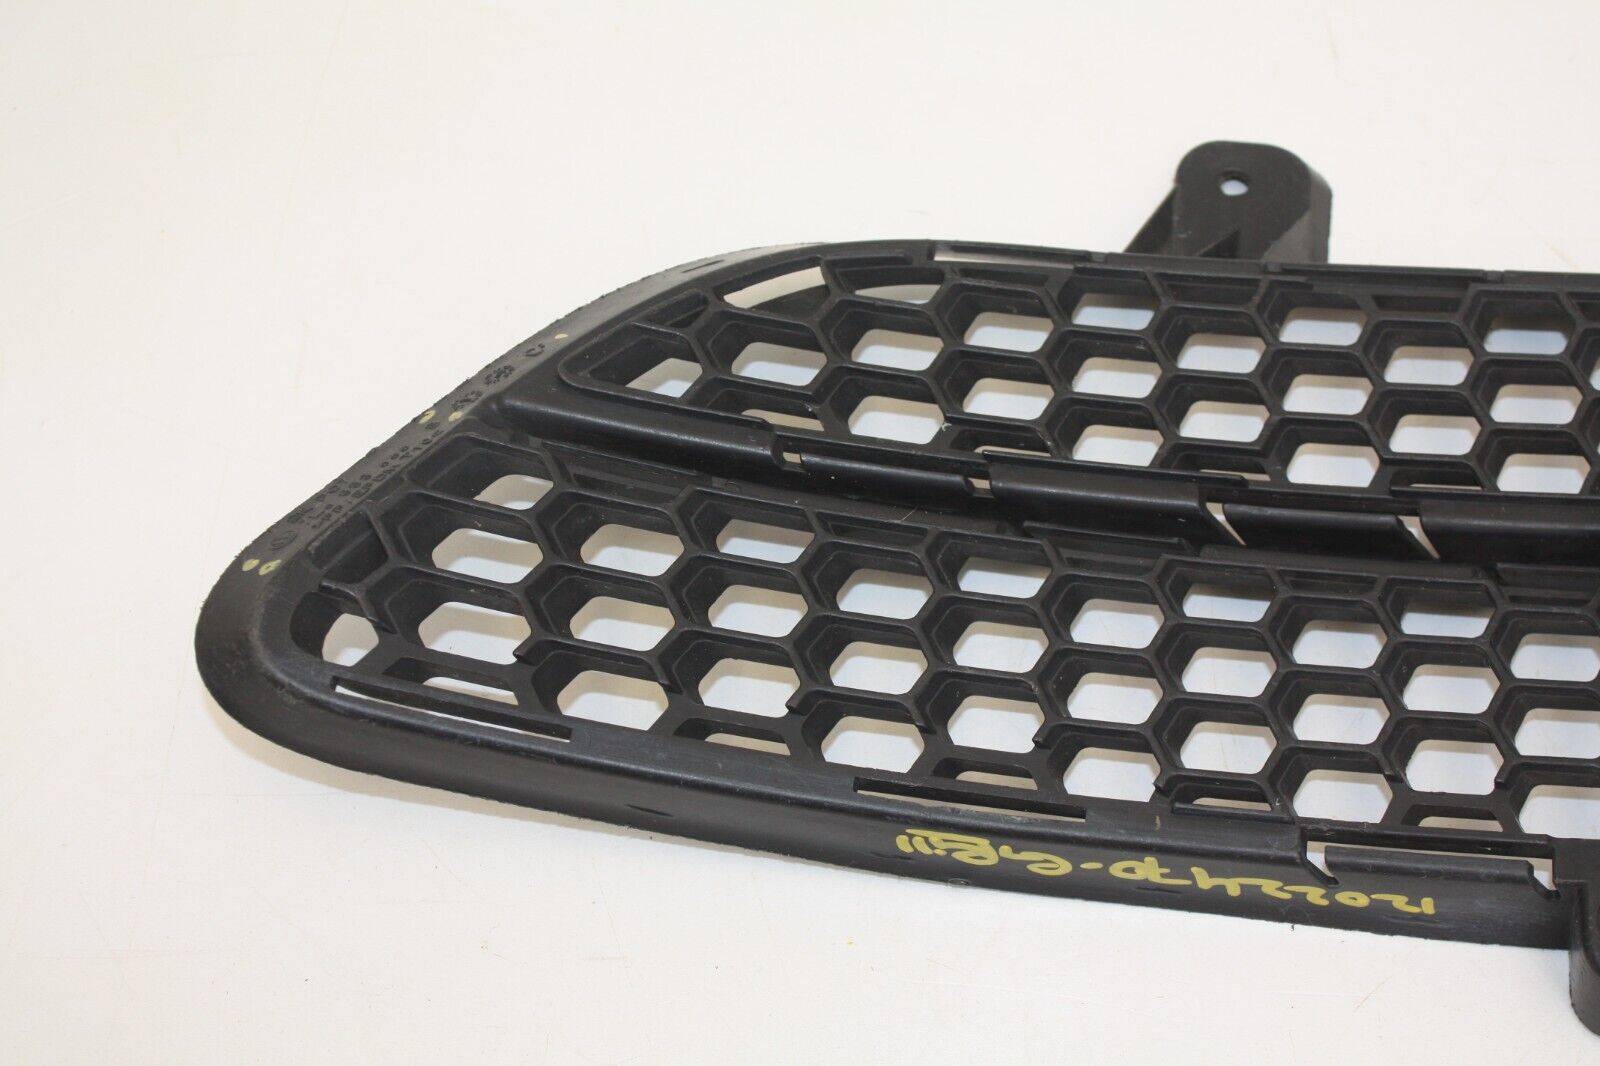 VW-Touareg-Front-Bumper-Right-Grill-2007-TO-2010-7L6853666B-Genuine-176241219097-6